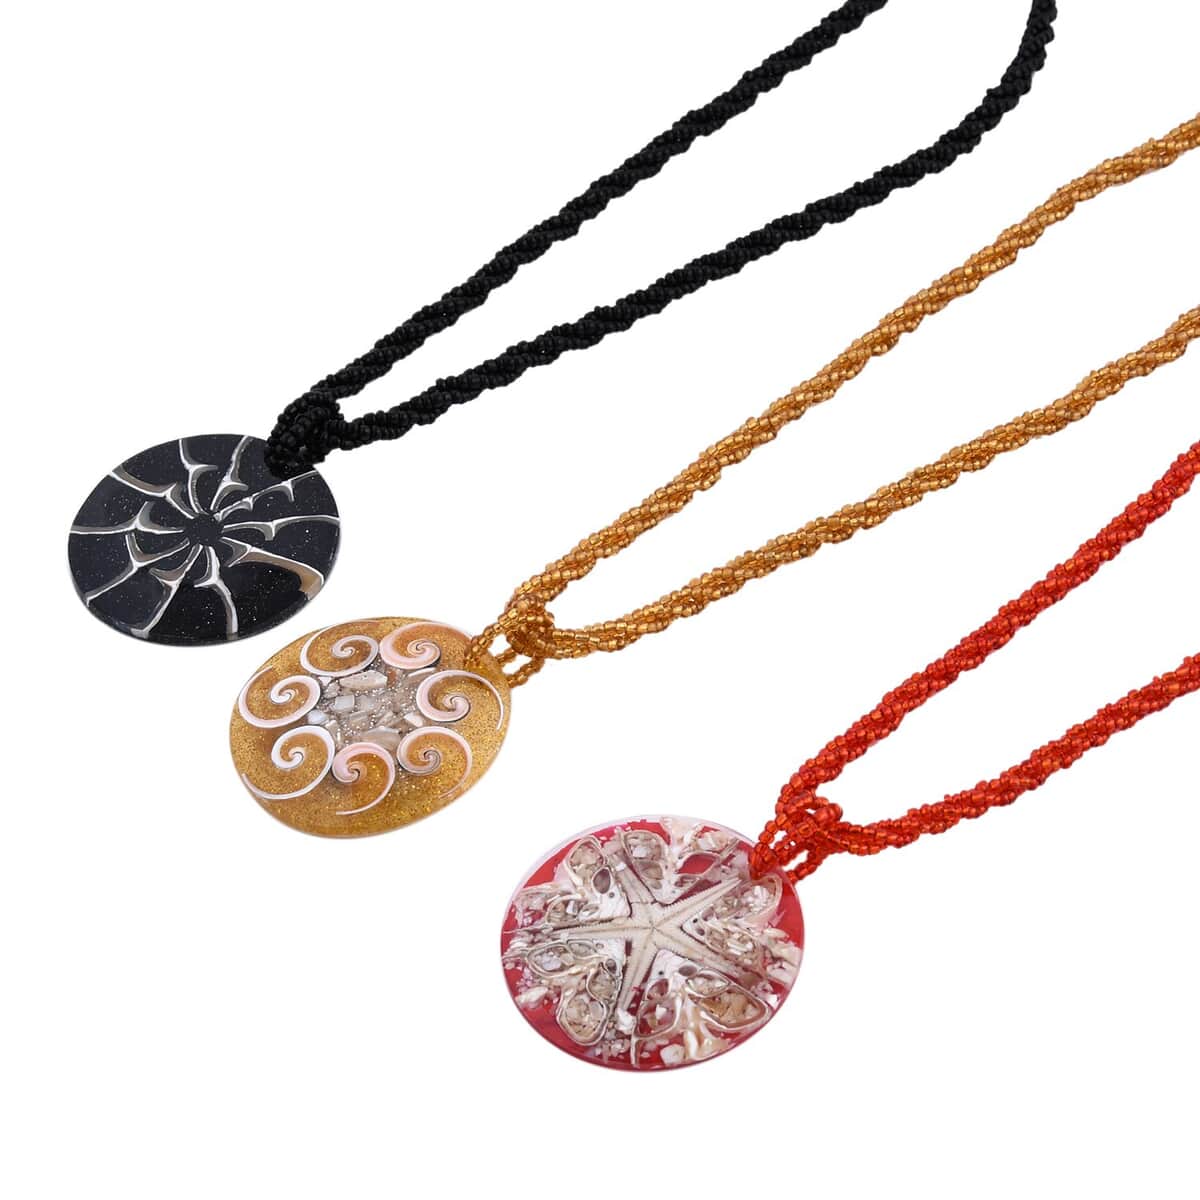 Resin Pendant Set of 3 Spider Net, Hurricane, and Star Motif With Matching Seed Beads Necklace (20 Inches) image number 2